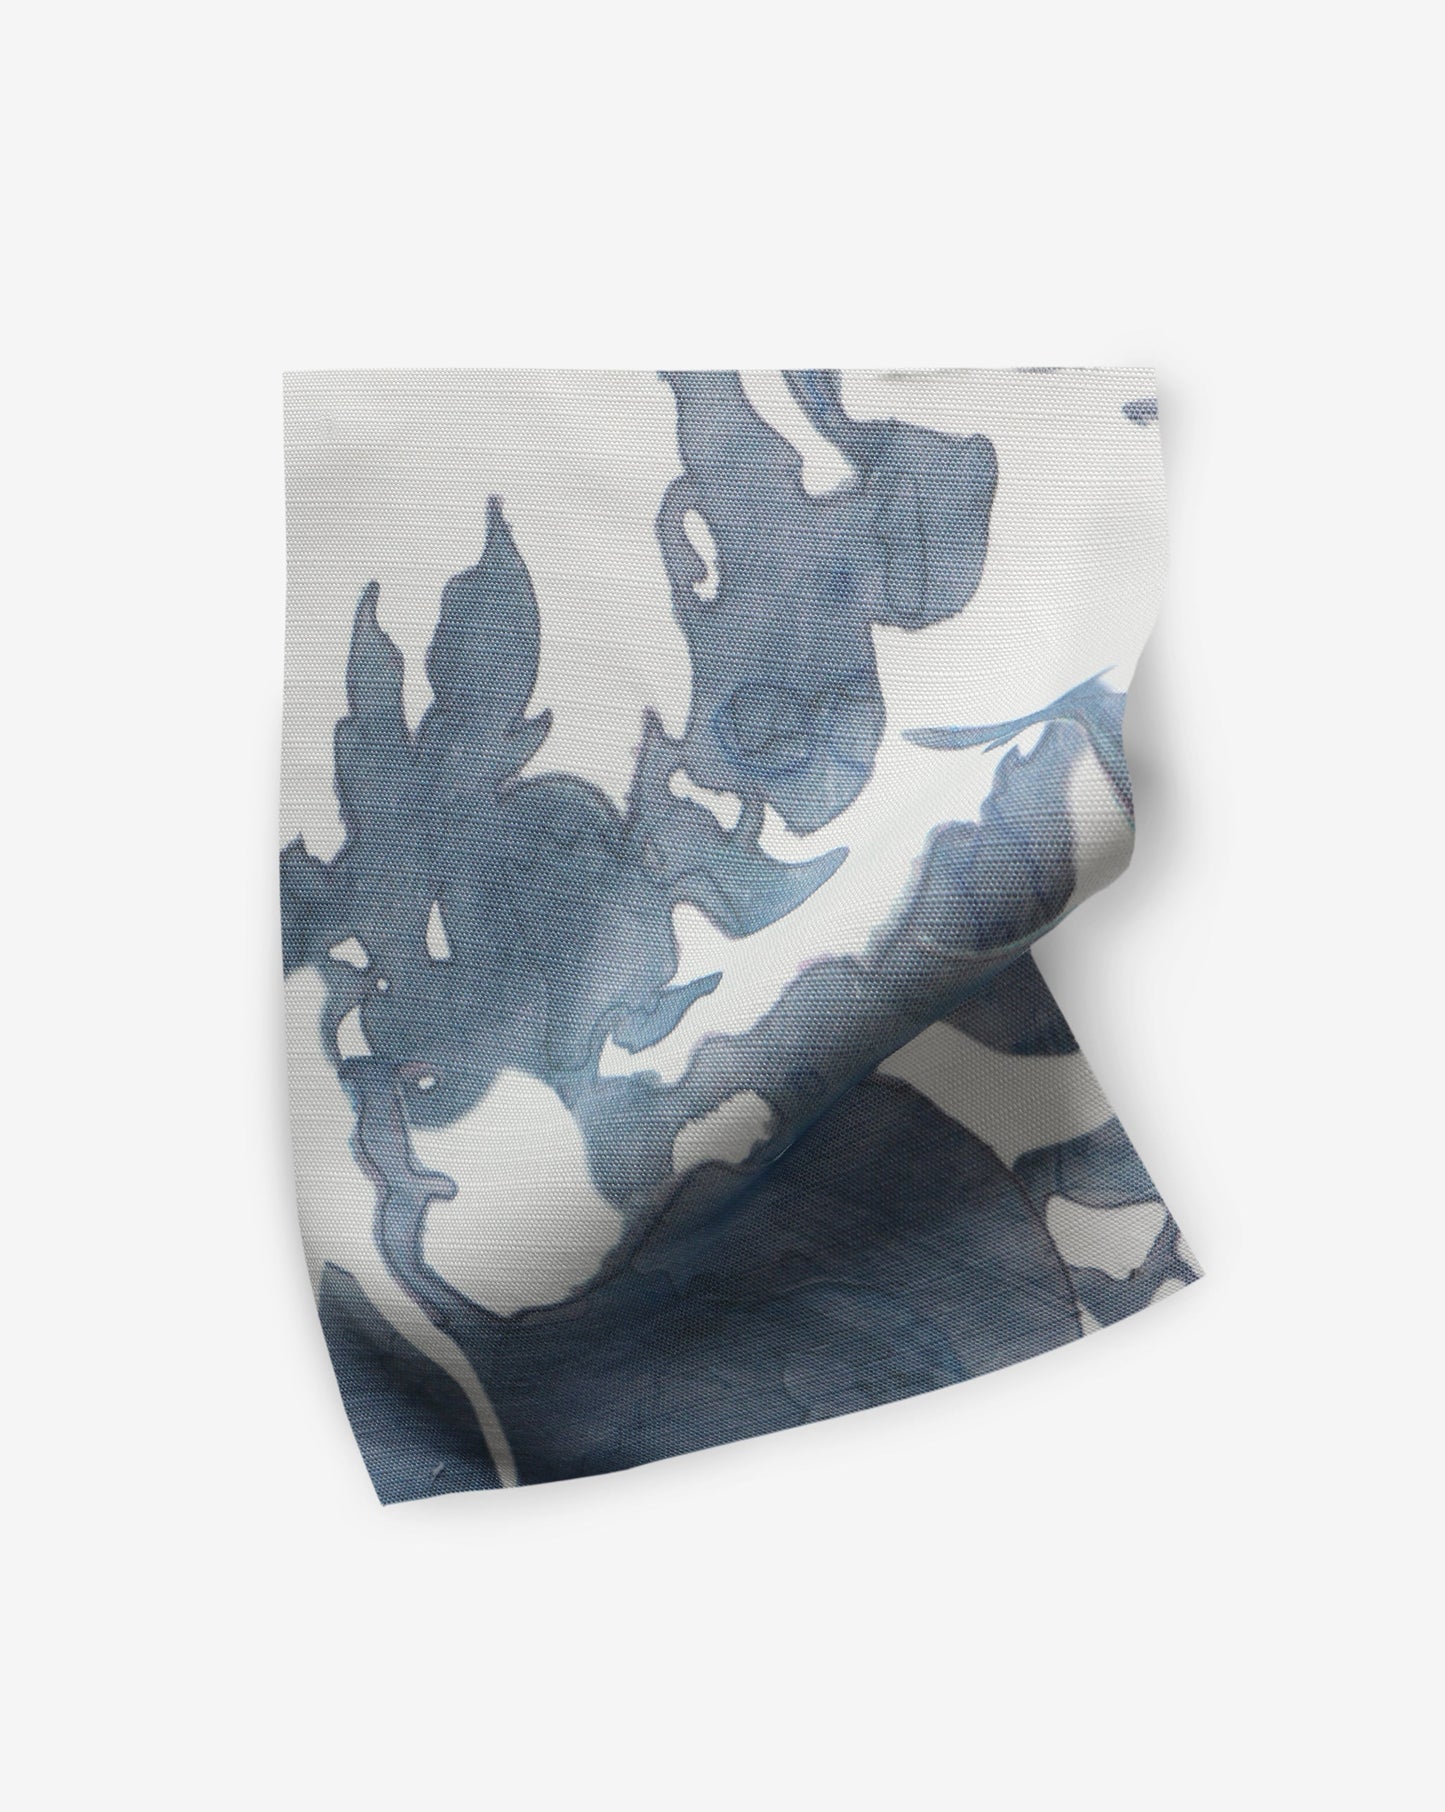 A Up for Anything Performance Fabric Cerulean painting on a white background featuring an abstract botanical pattern